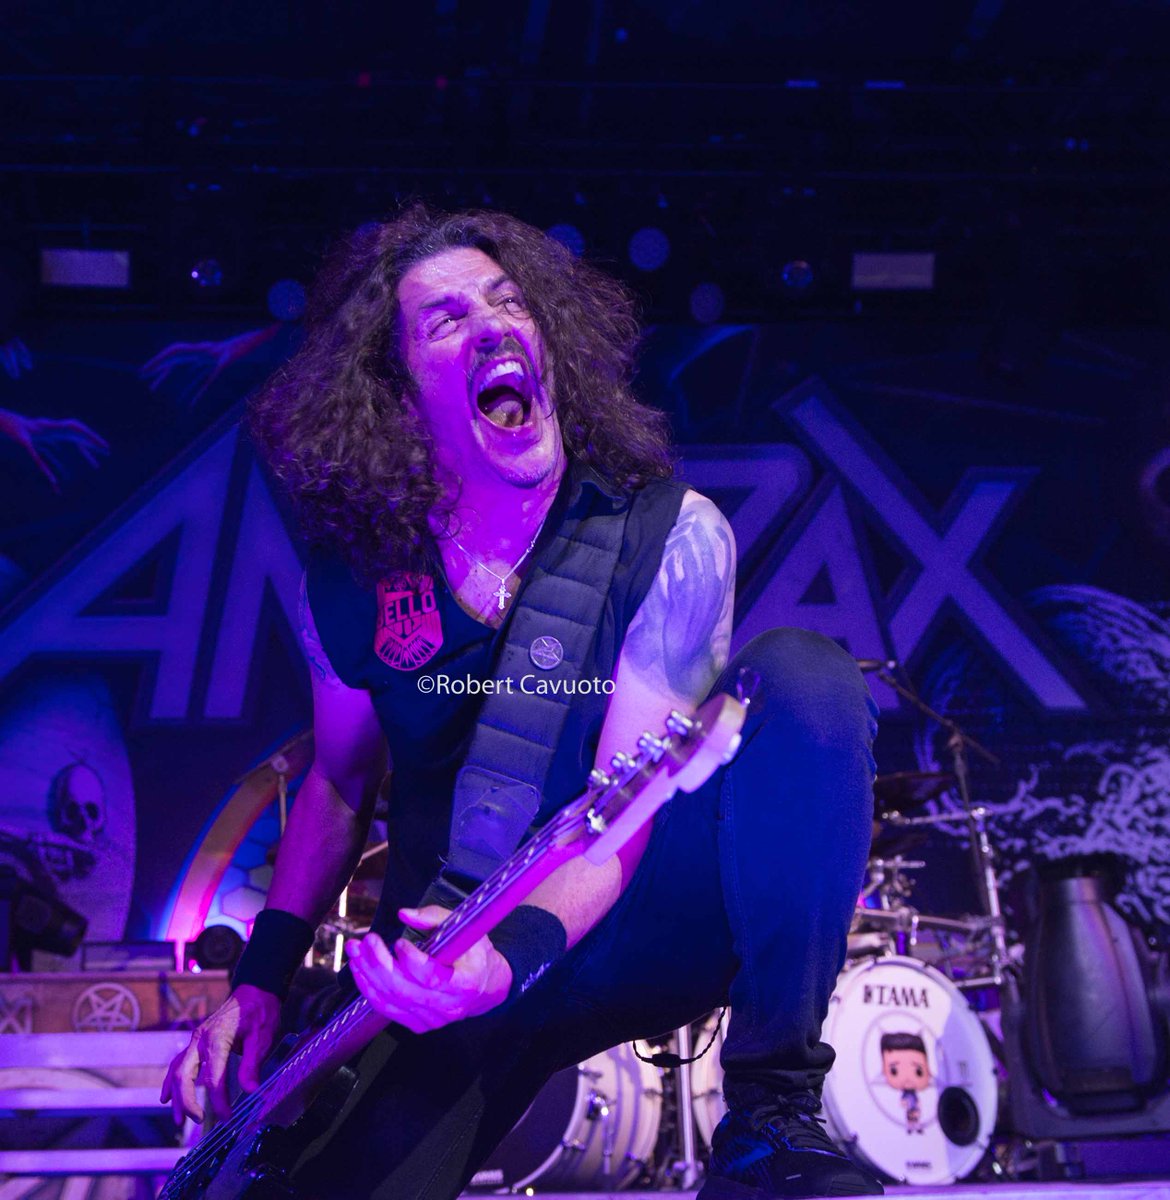 With his bass slung down low, Frank Bello of #ANTHRAX ran the stage at a dizzying pace & headbanging all night whipping the fans into a frenzy at The Fillmore 8/28/22 @Anthrax @TheFrankBello